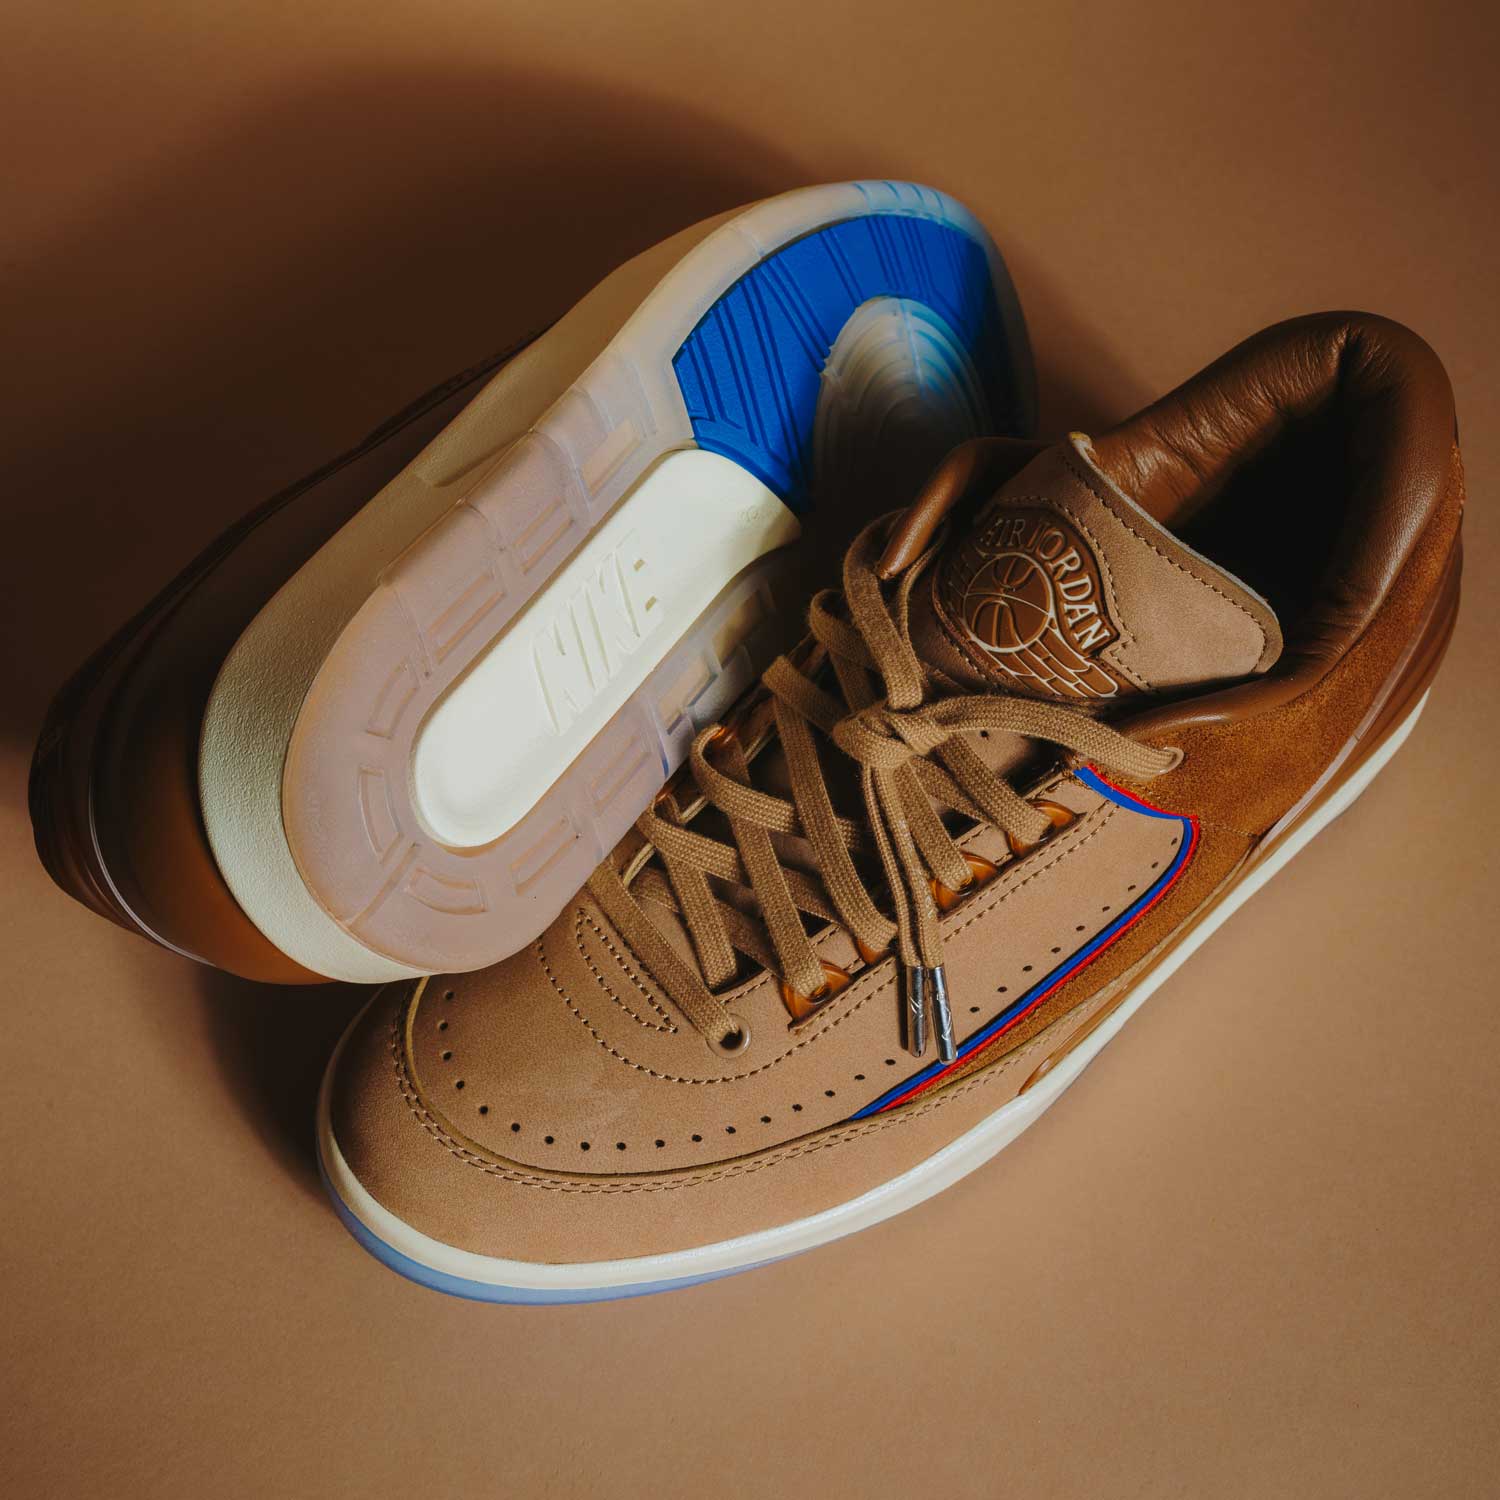 Jordan Brand collaboration with Detroit's Two18 is a fresh breeze